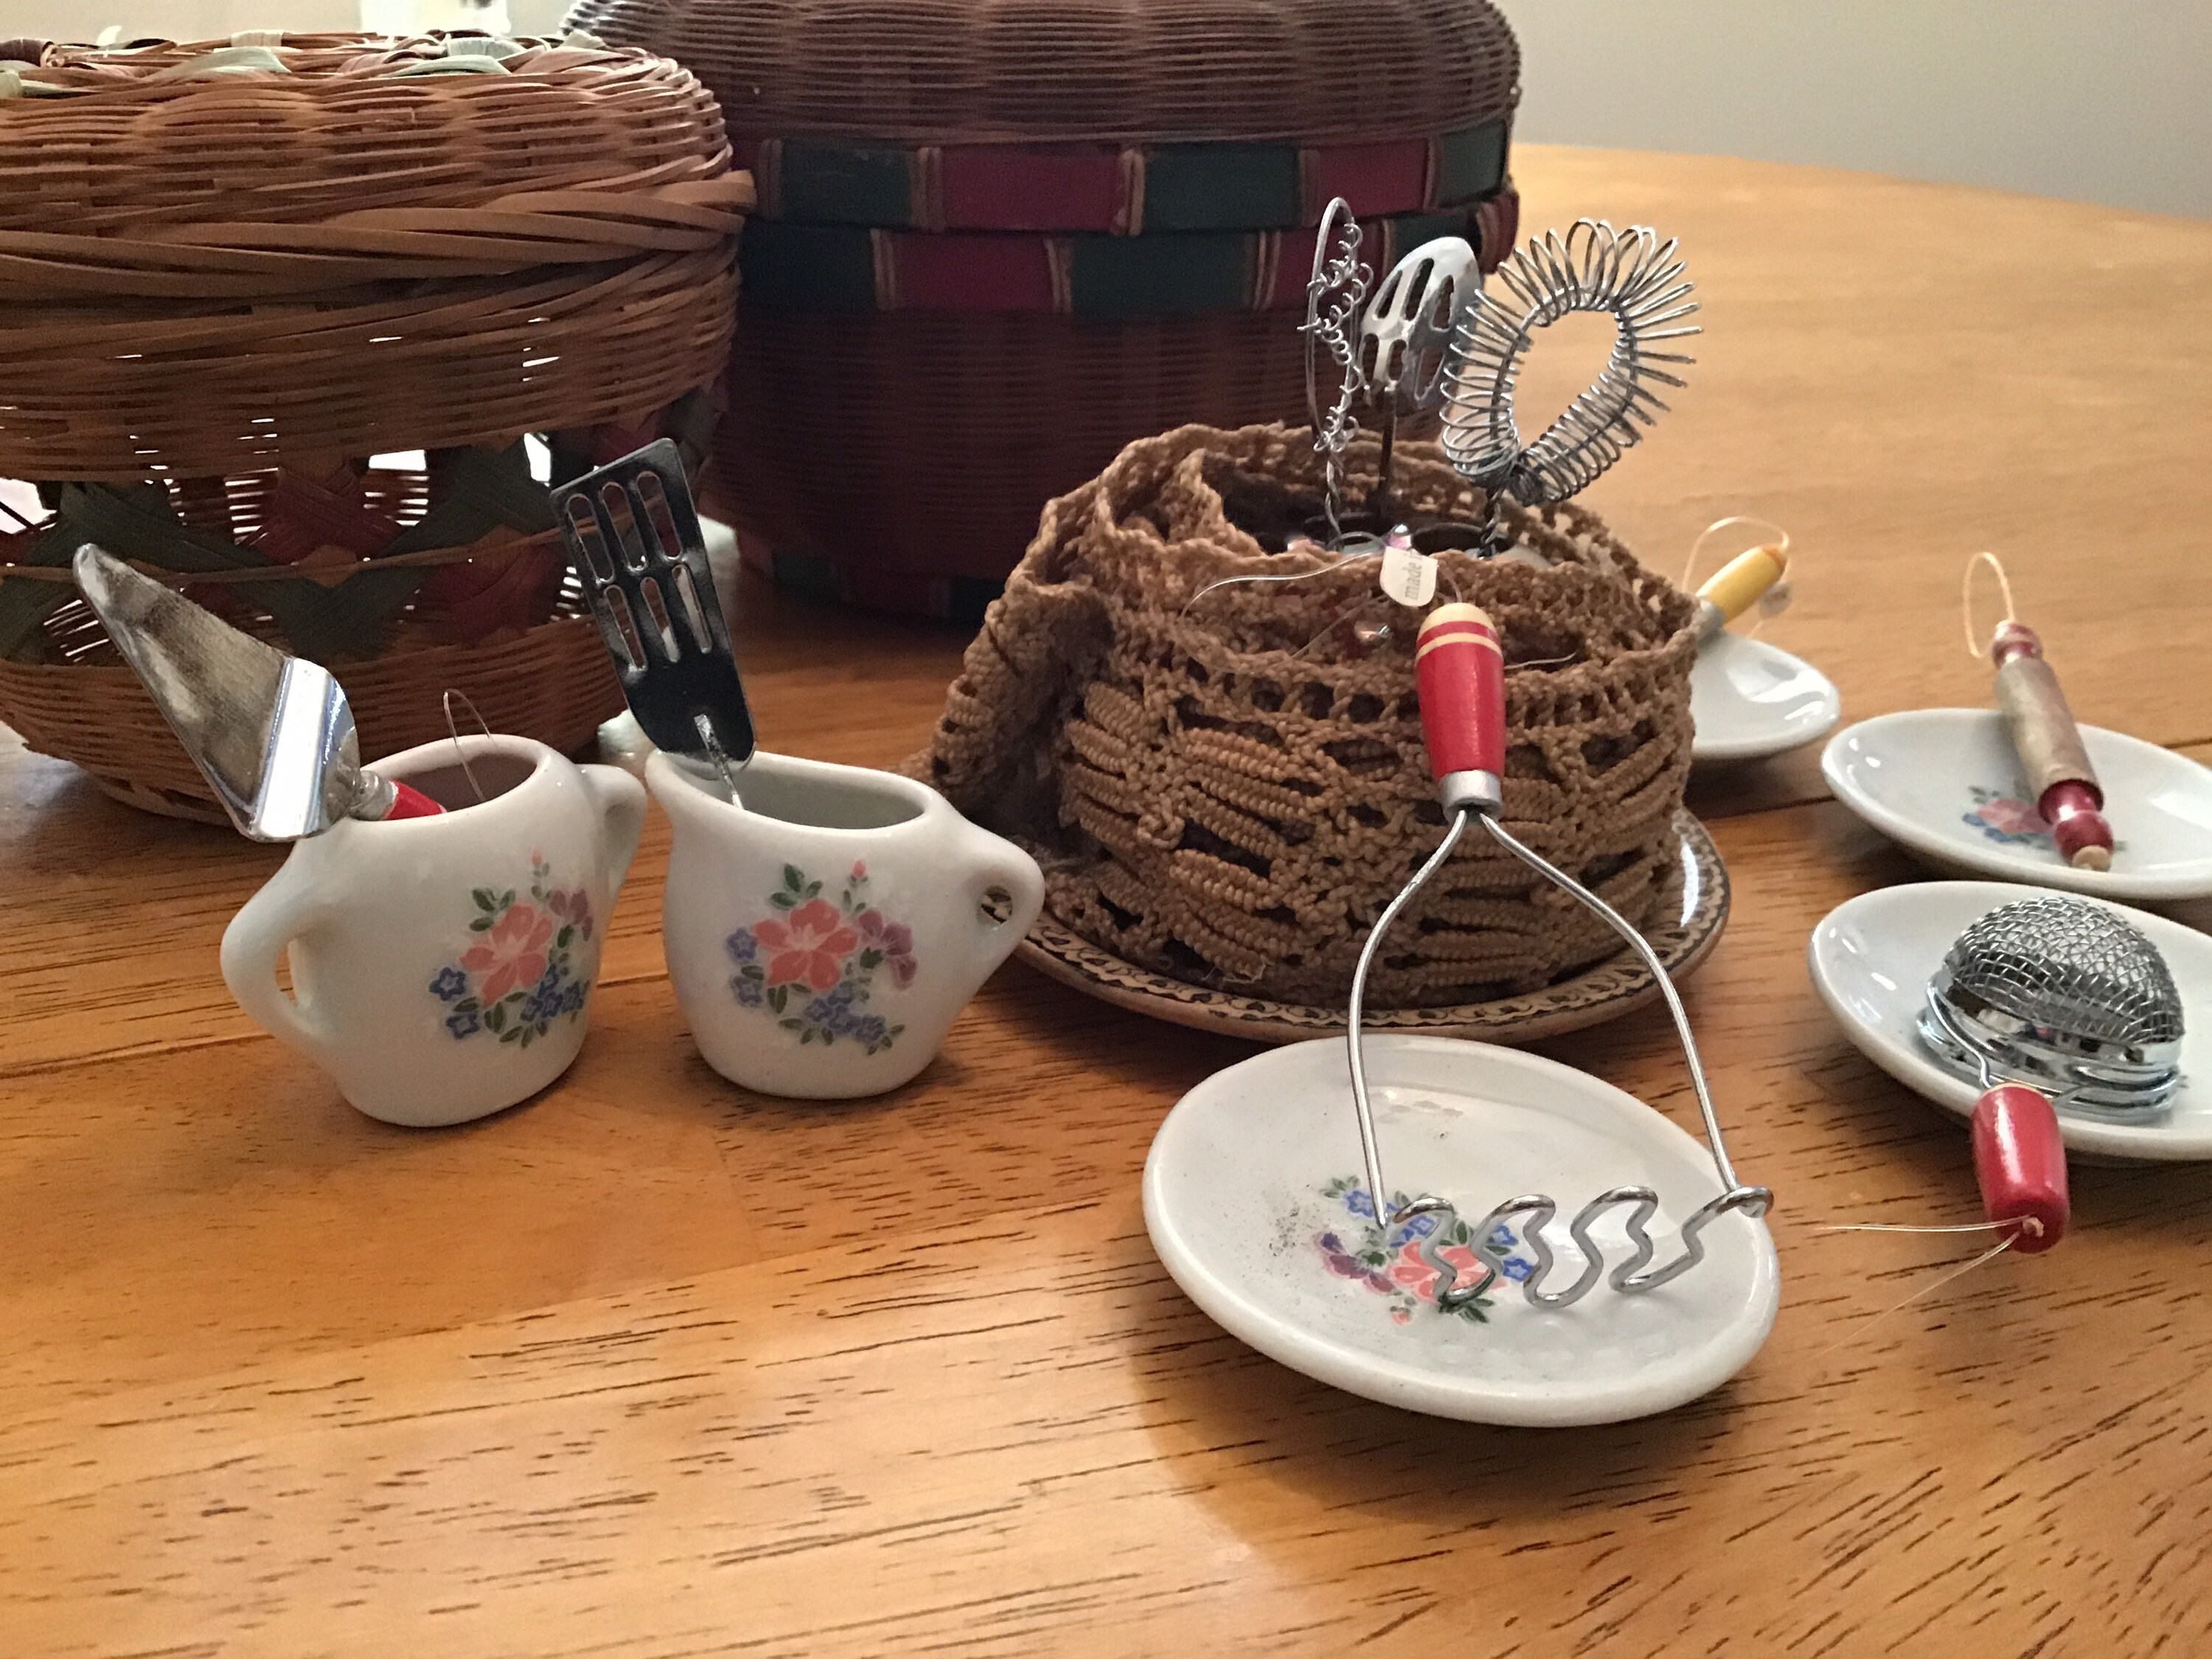 Dollhouse hand fashioned vintage kitchen utensils hand painted 1930\u2019s-1940\u2019s colors and style CUTE MINIATURE reproductions  2\u201d